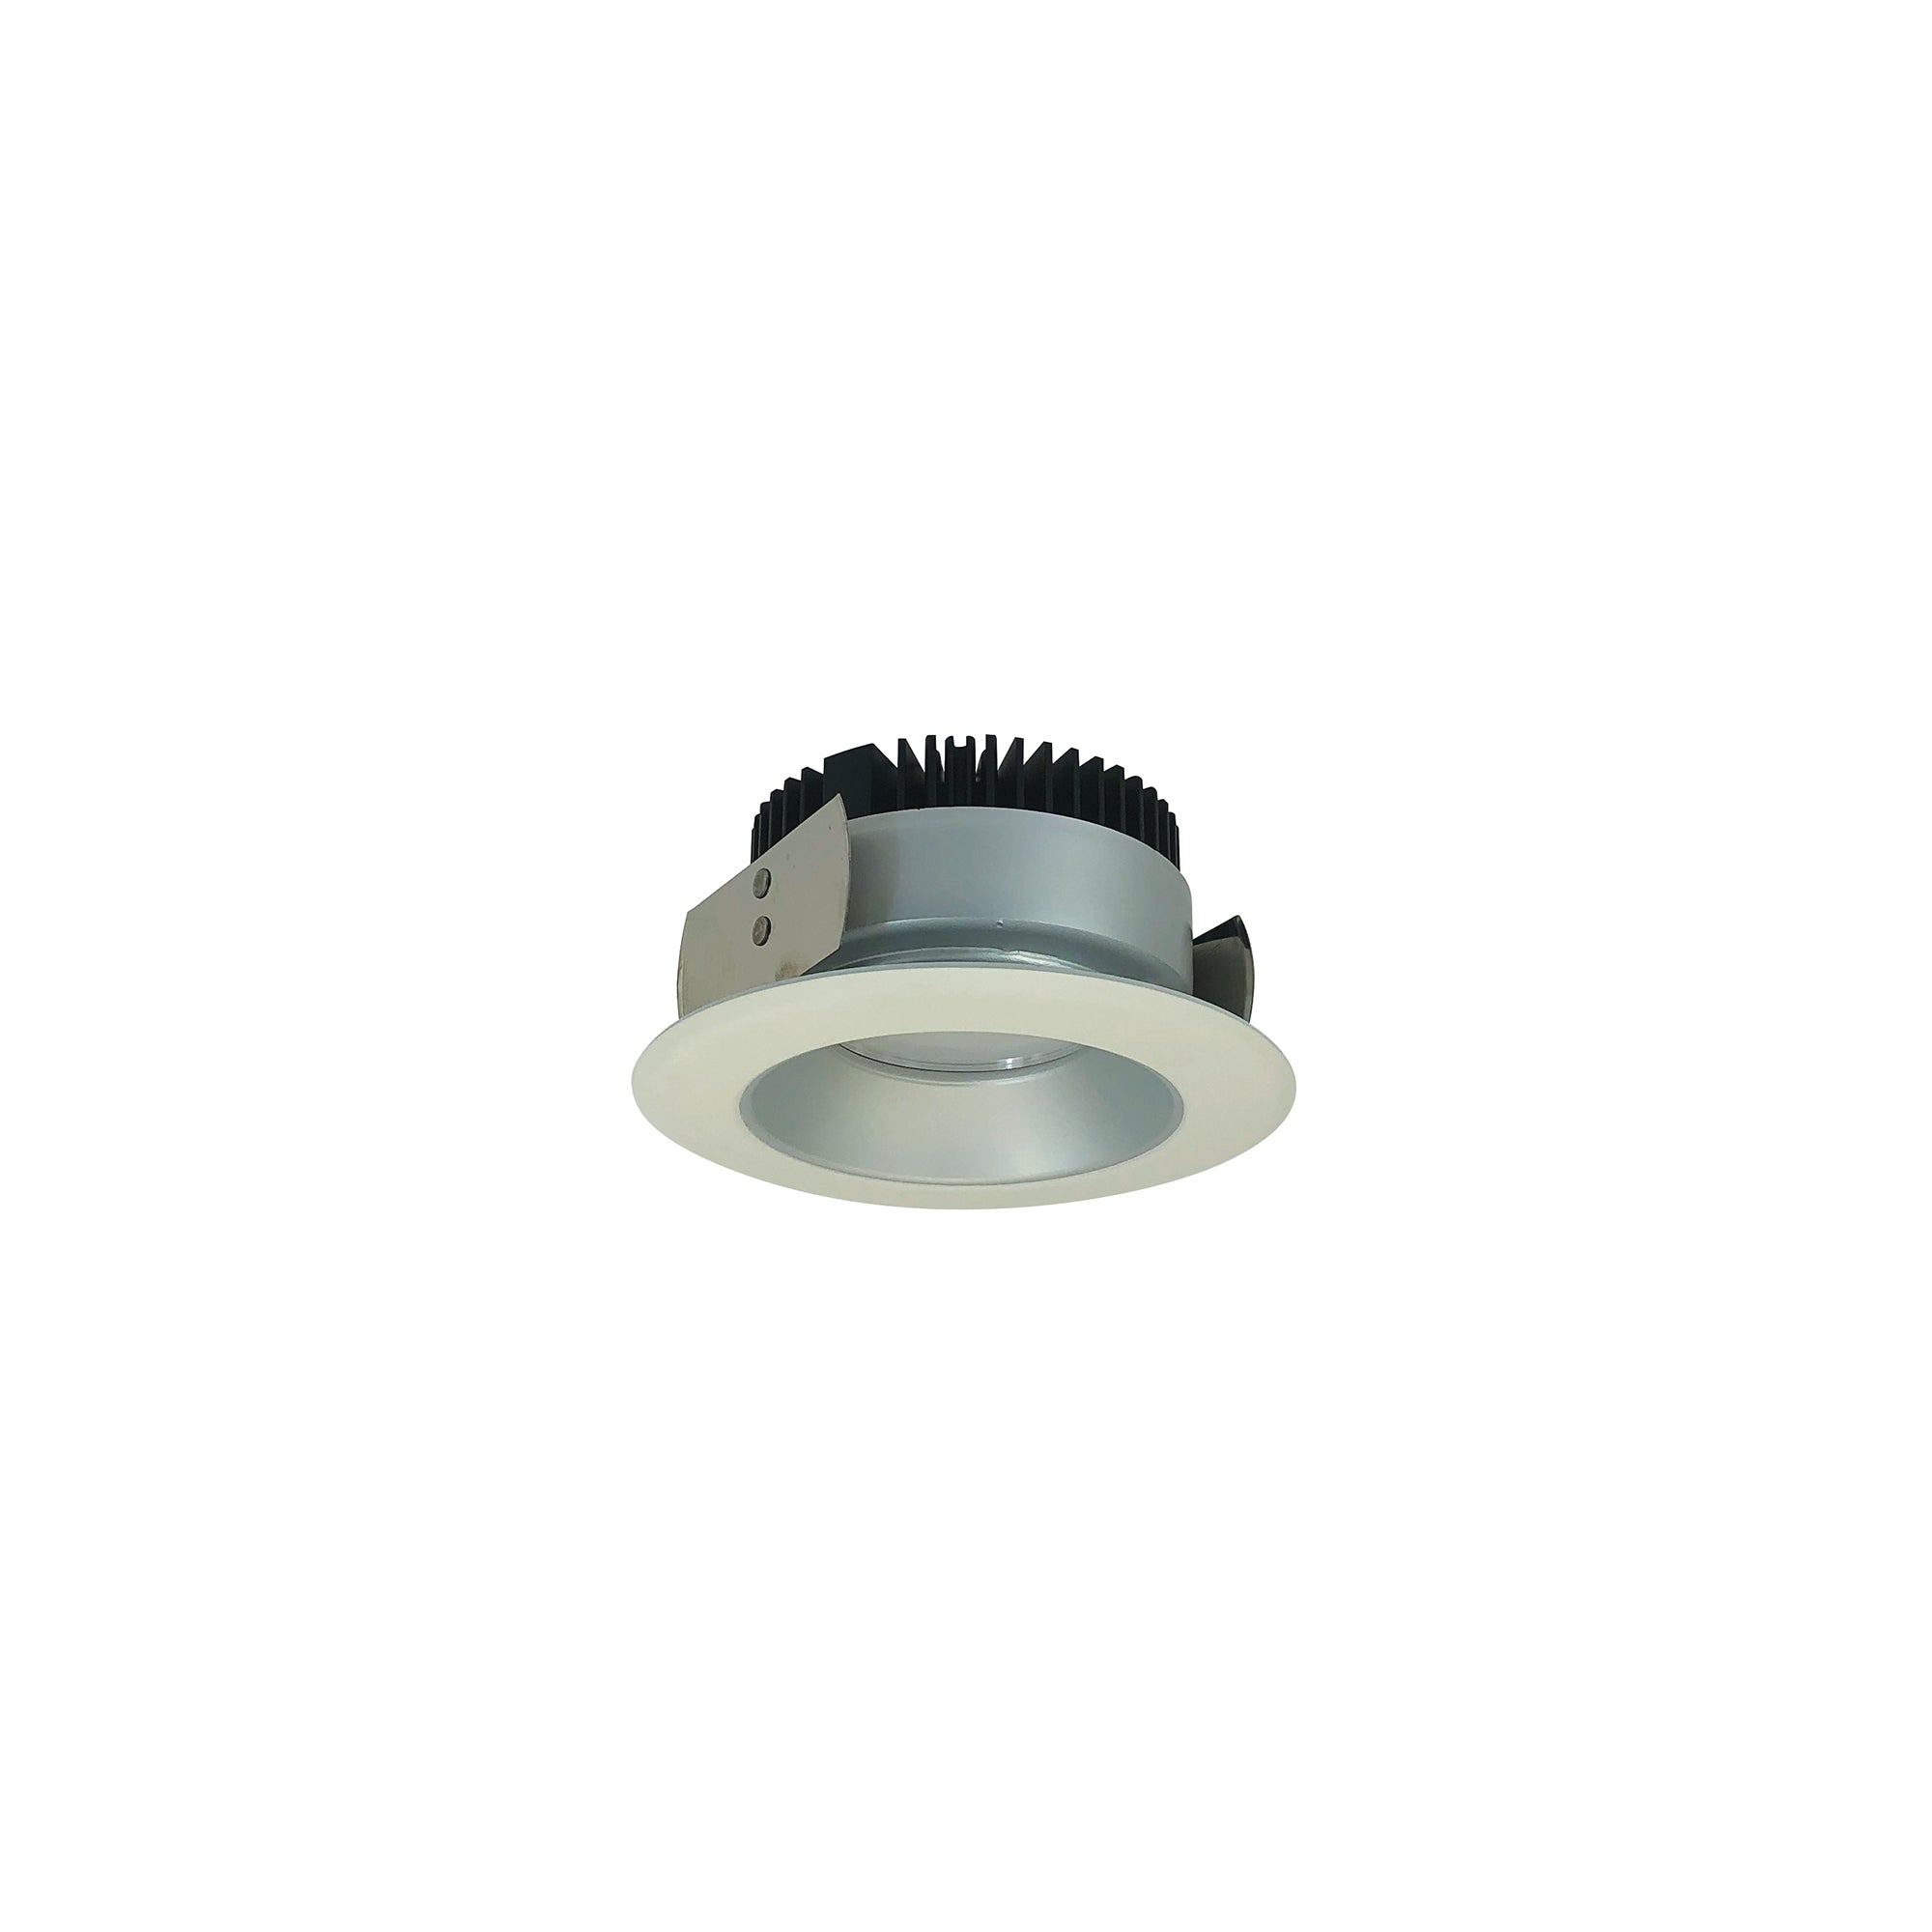 Nora Lighting NRM2-411L0940SHZW - Recessed - 4 Inch Marquise II Round Reflector, 900lm, 4000K, Spot, Haze/White